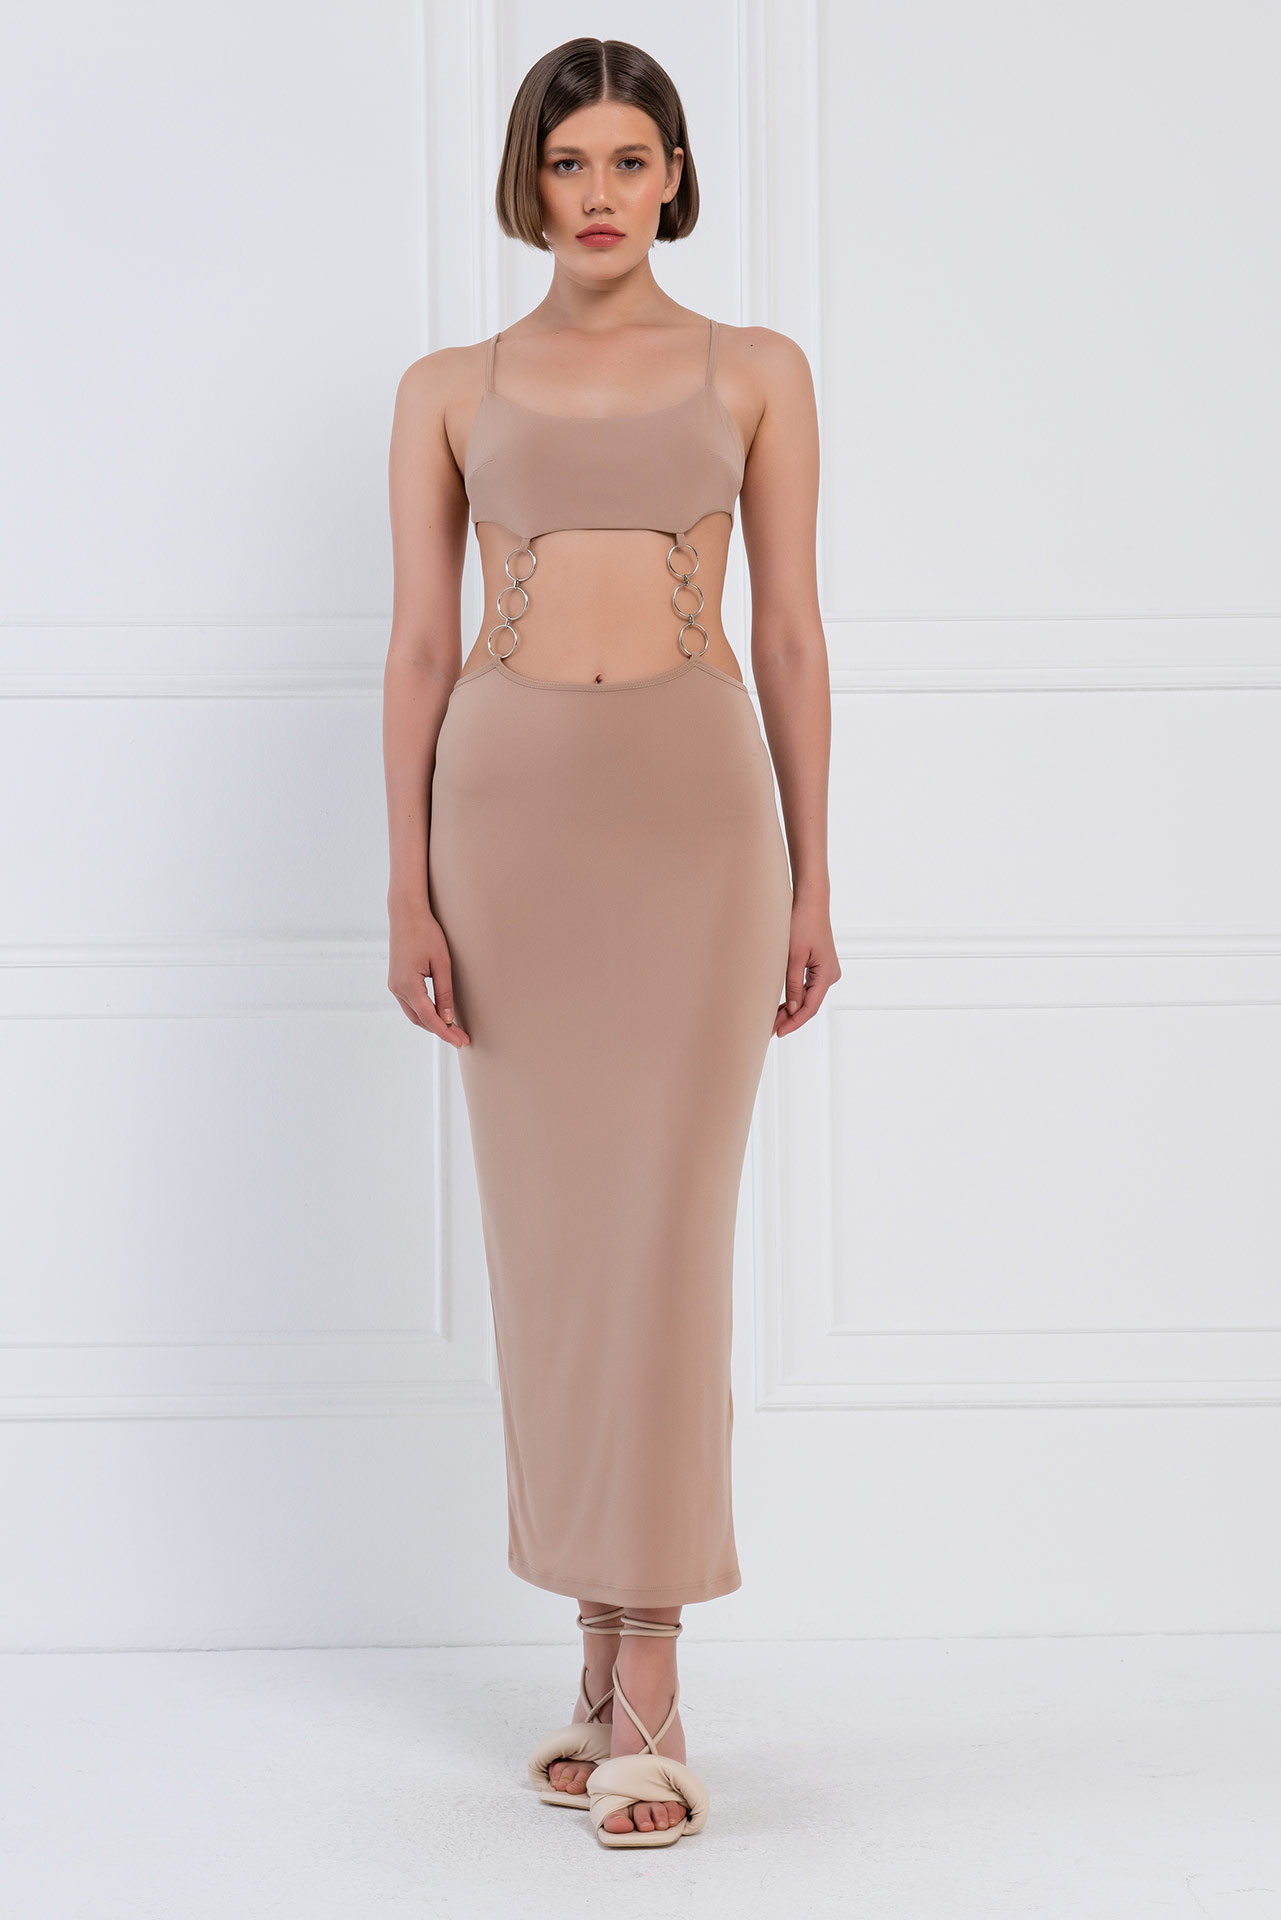 Wholesale Sand Backless Cut Out Maxi Dress